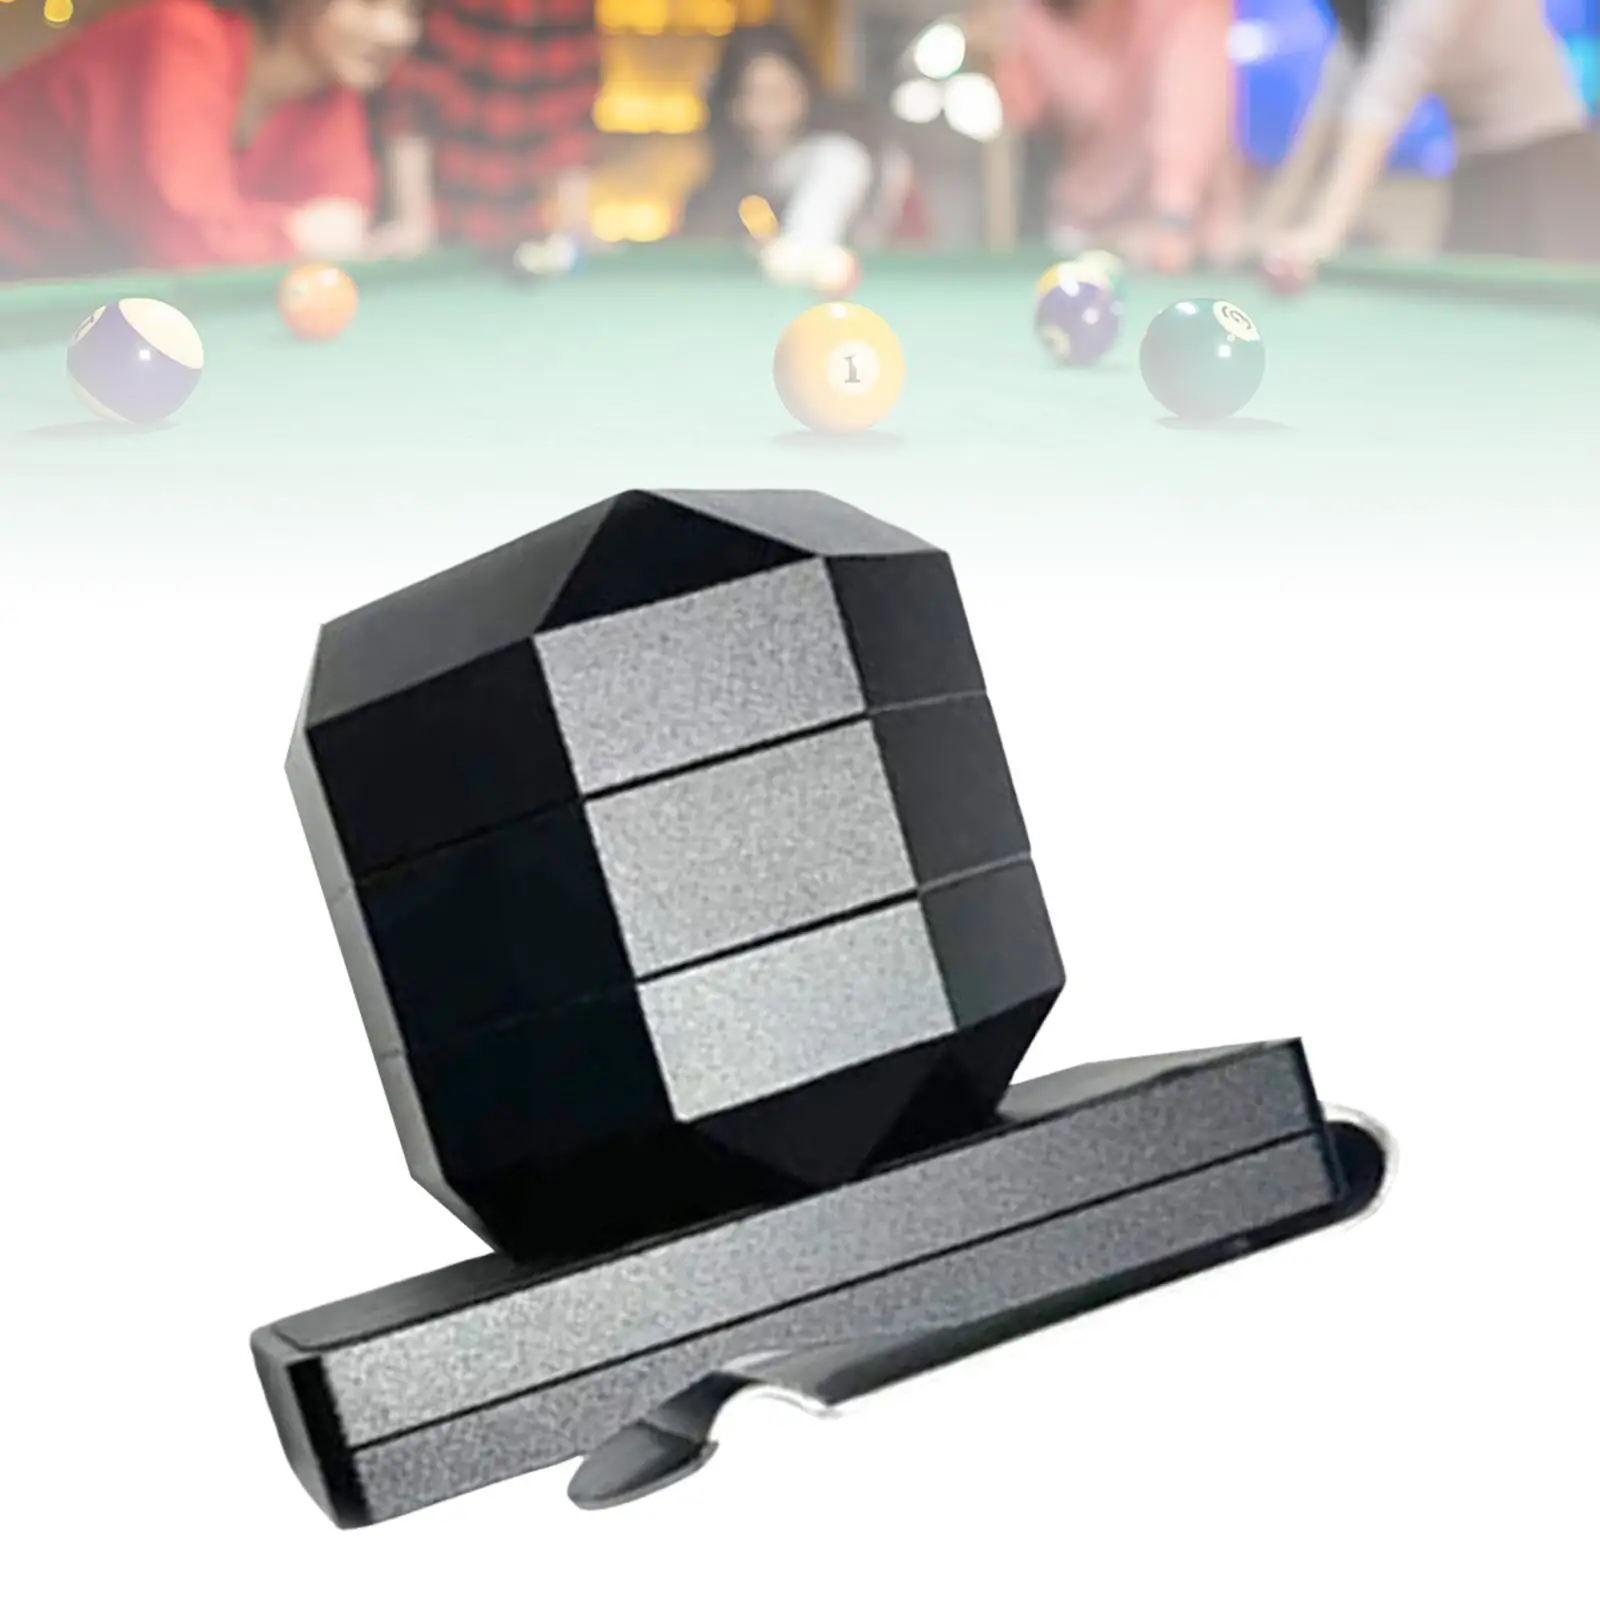 Portable Billiard Chalk Holder, with Belt Clip Container Practical Tool Supplies